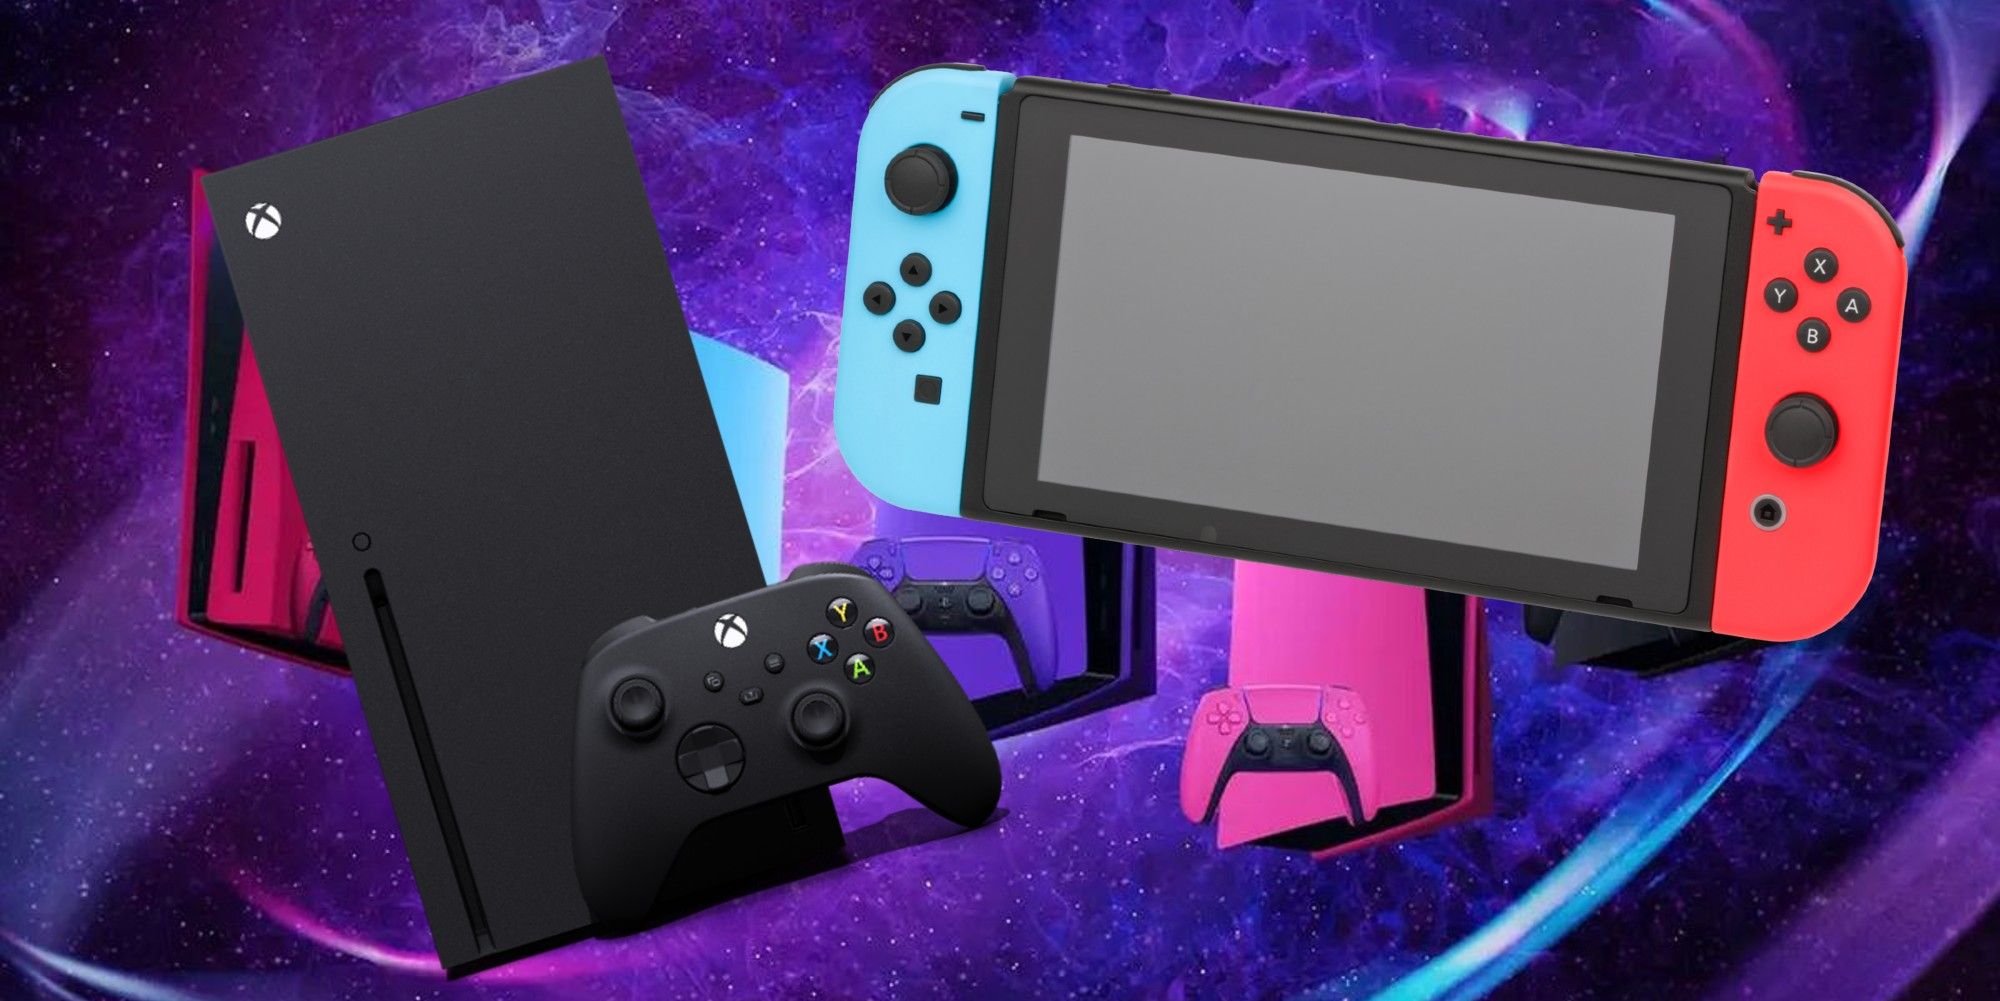 ps5s series x and a switch